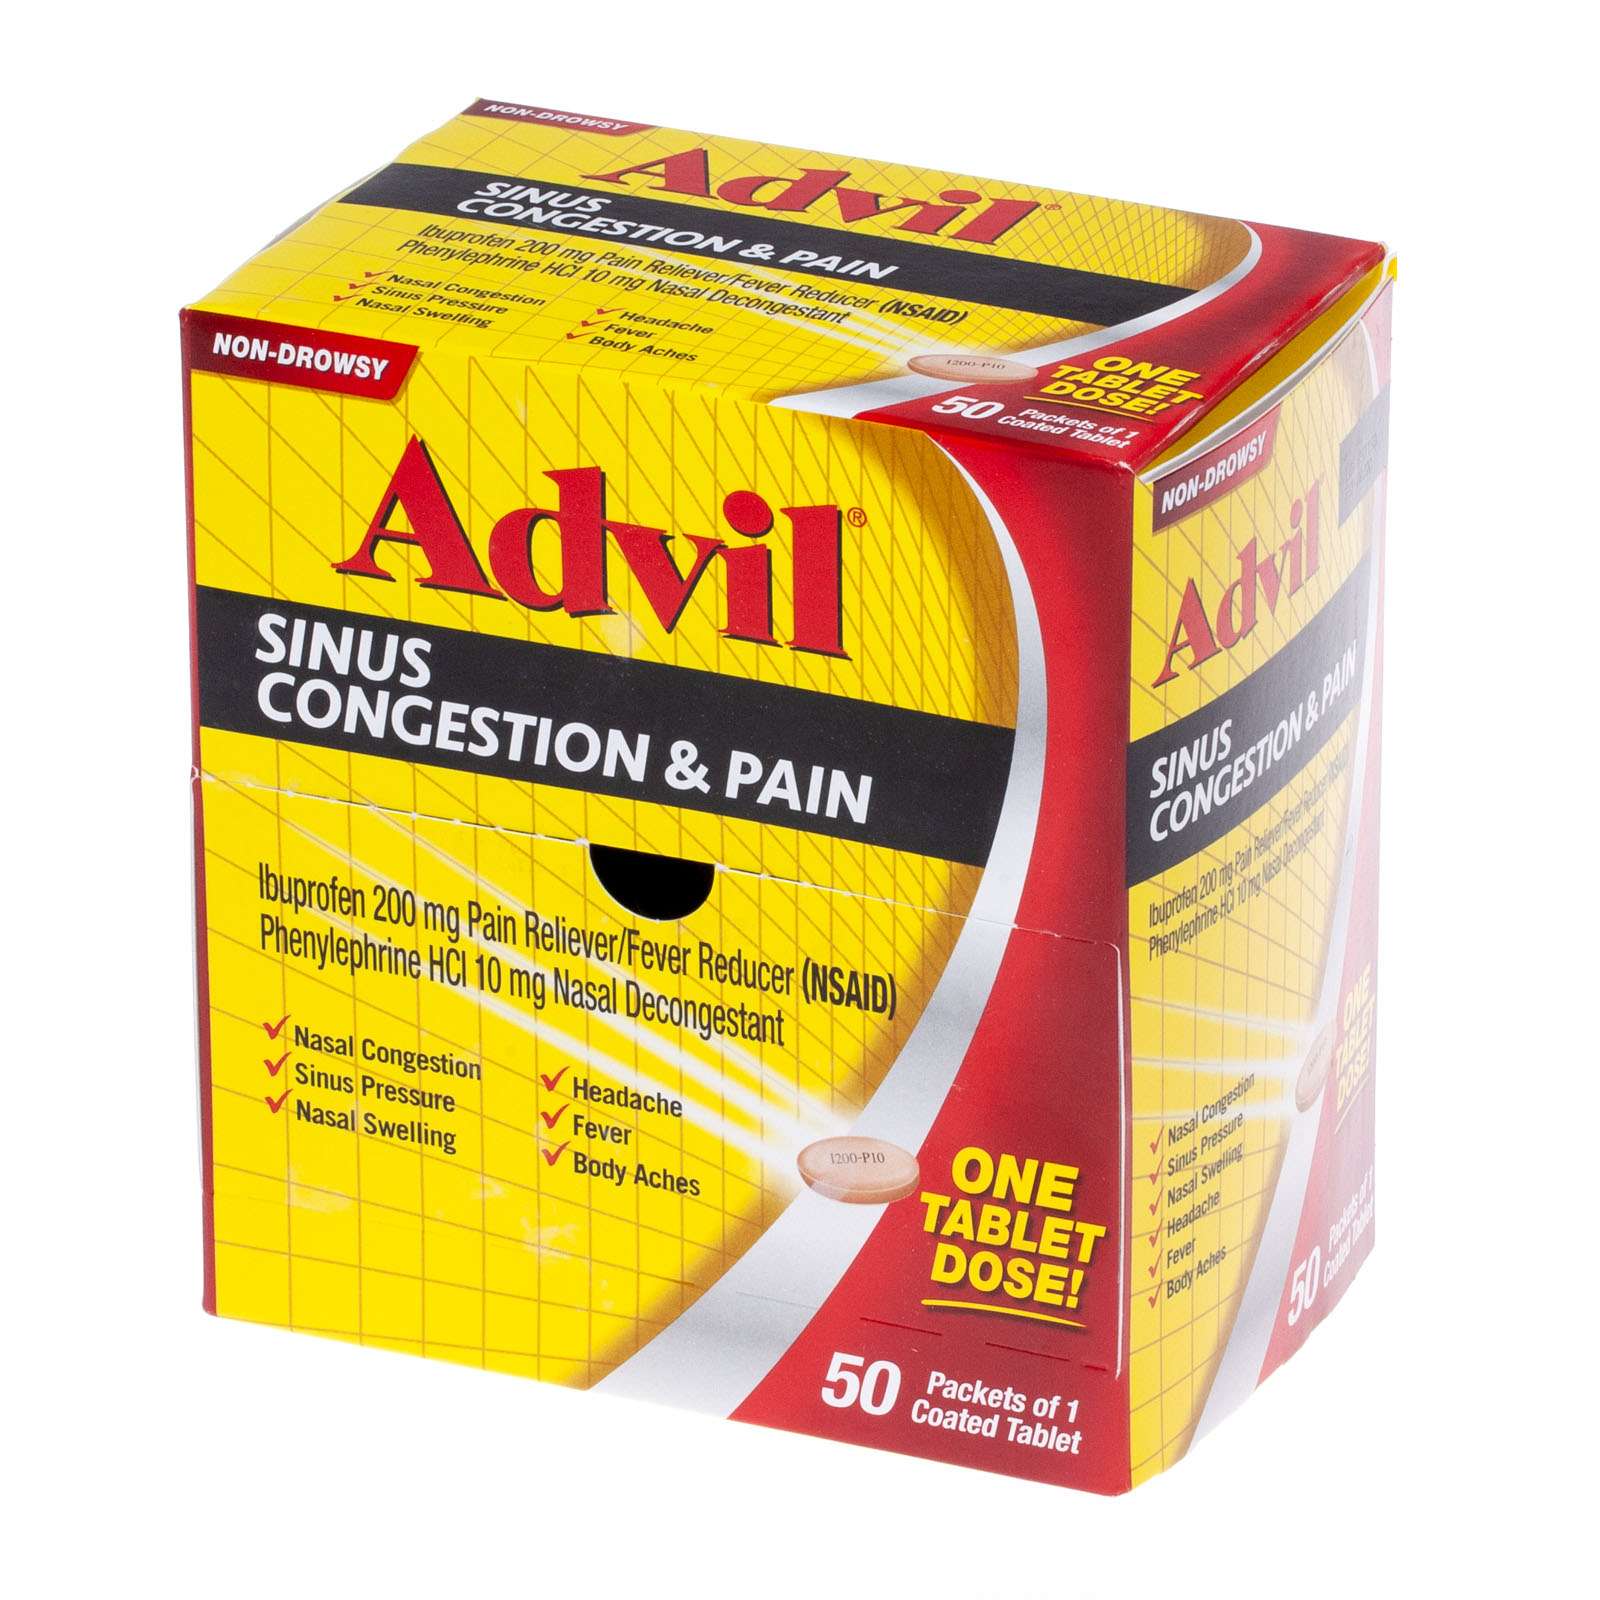 Advil Sinus Congestion &  Pain 50 Packets of 1 Tablet 200 ...